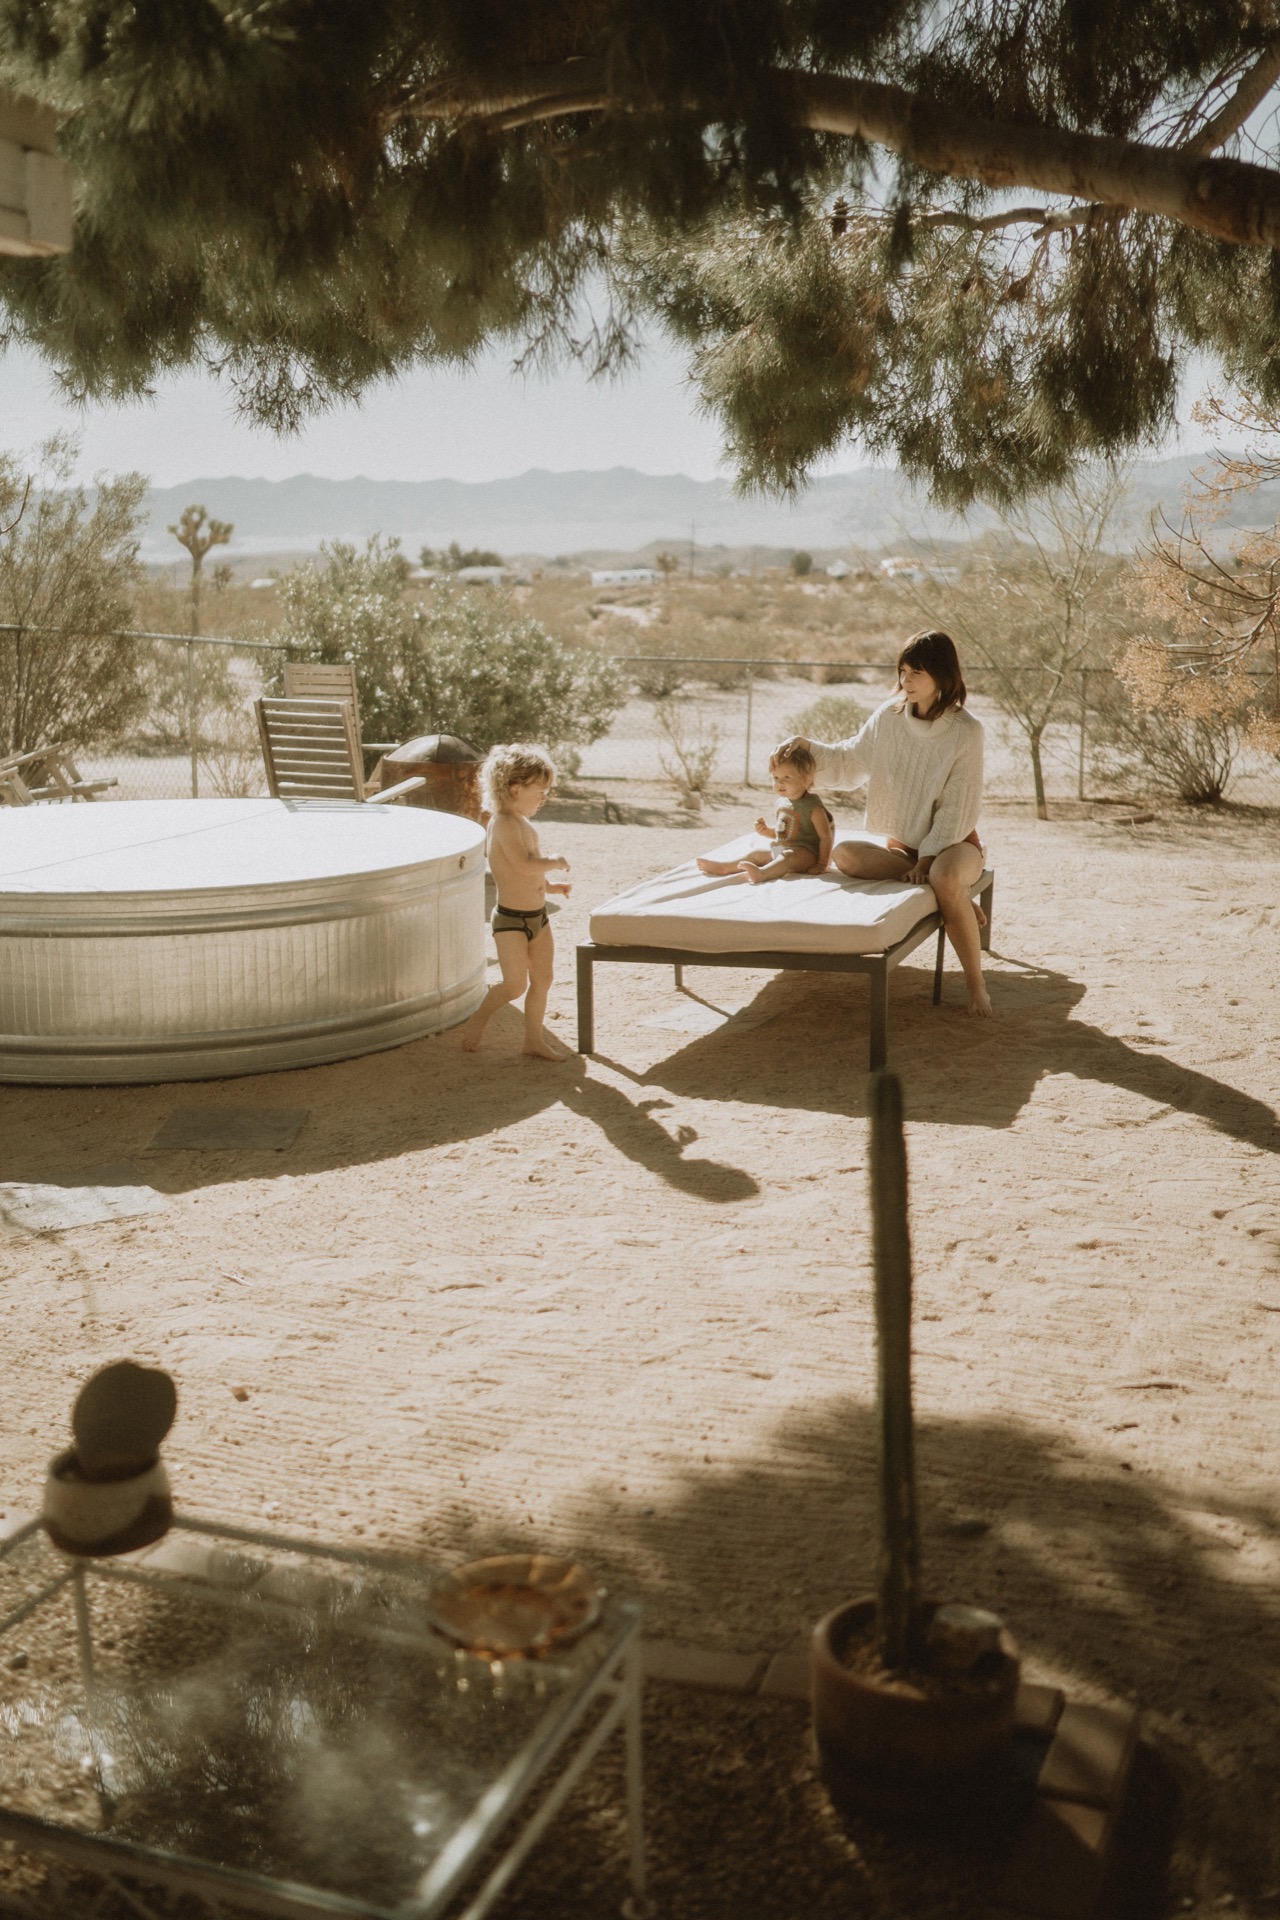 A family photo of a female sitting in a garden setting with two small children near Yucca Valley, California.